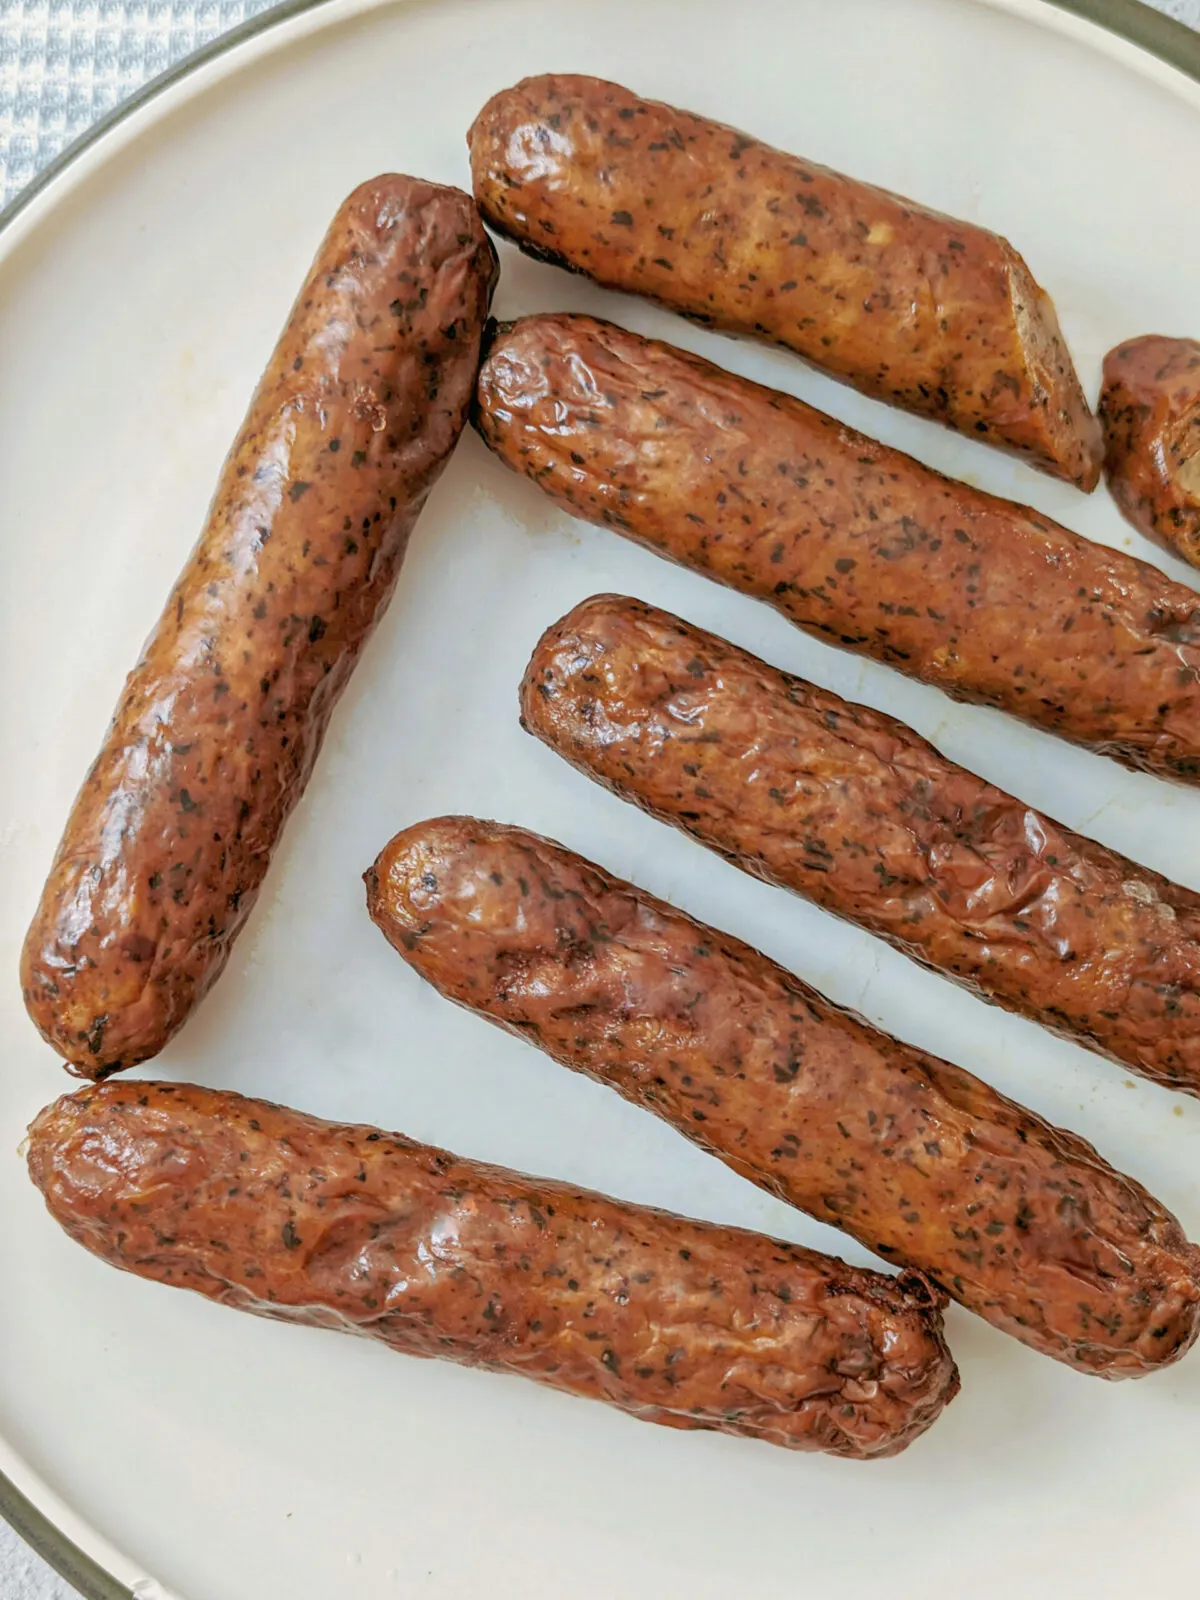 Chicken sausage links on a plate.